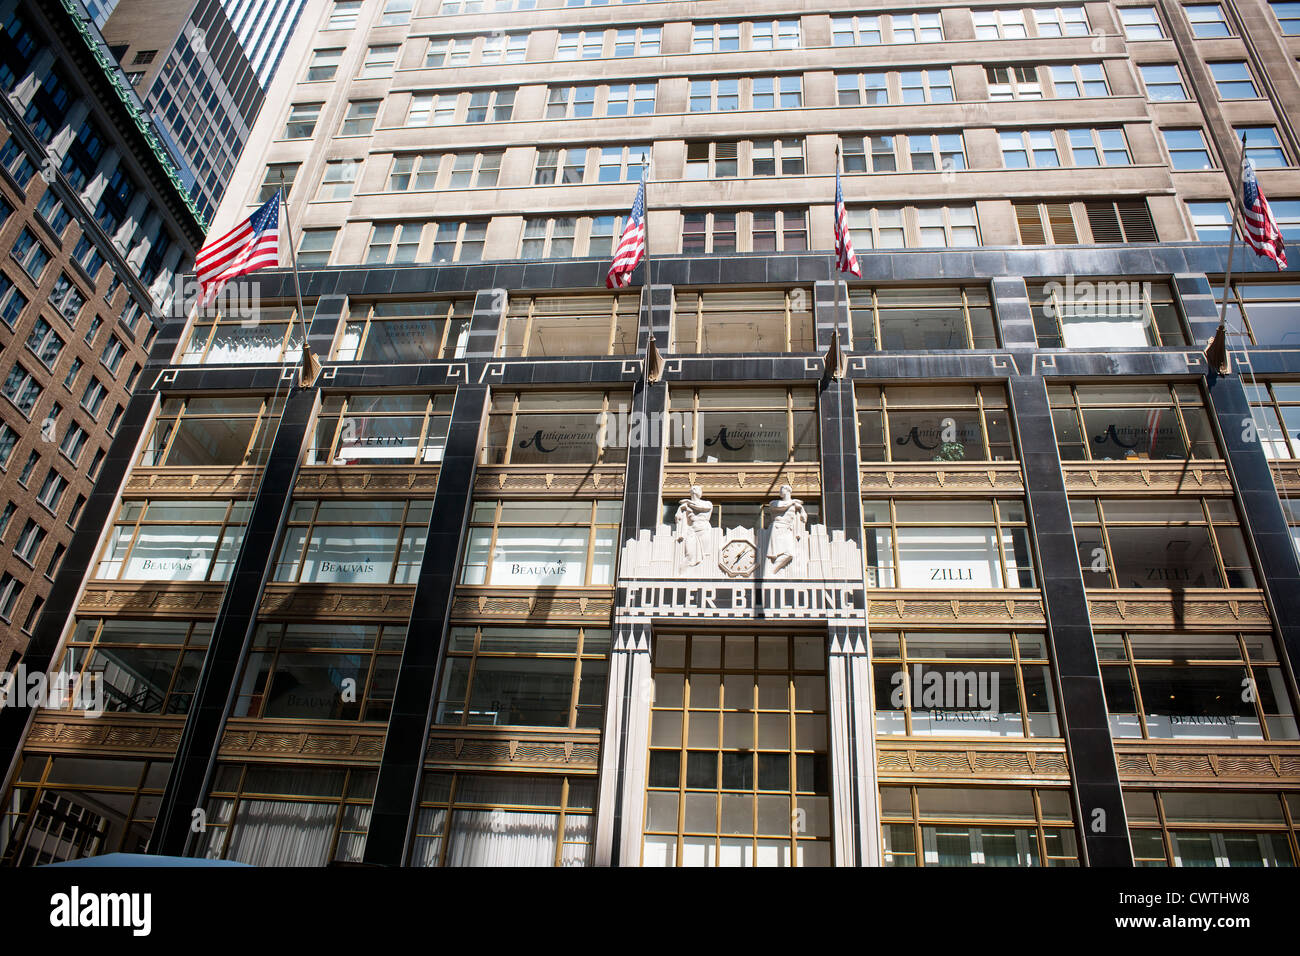 The Fuller Building on East 57th Street in midtown Manhattan in New York  Stock Photo - Alamy